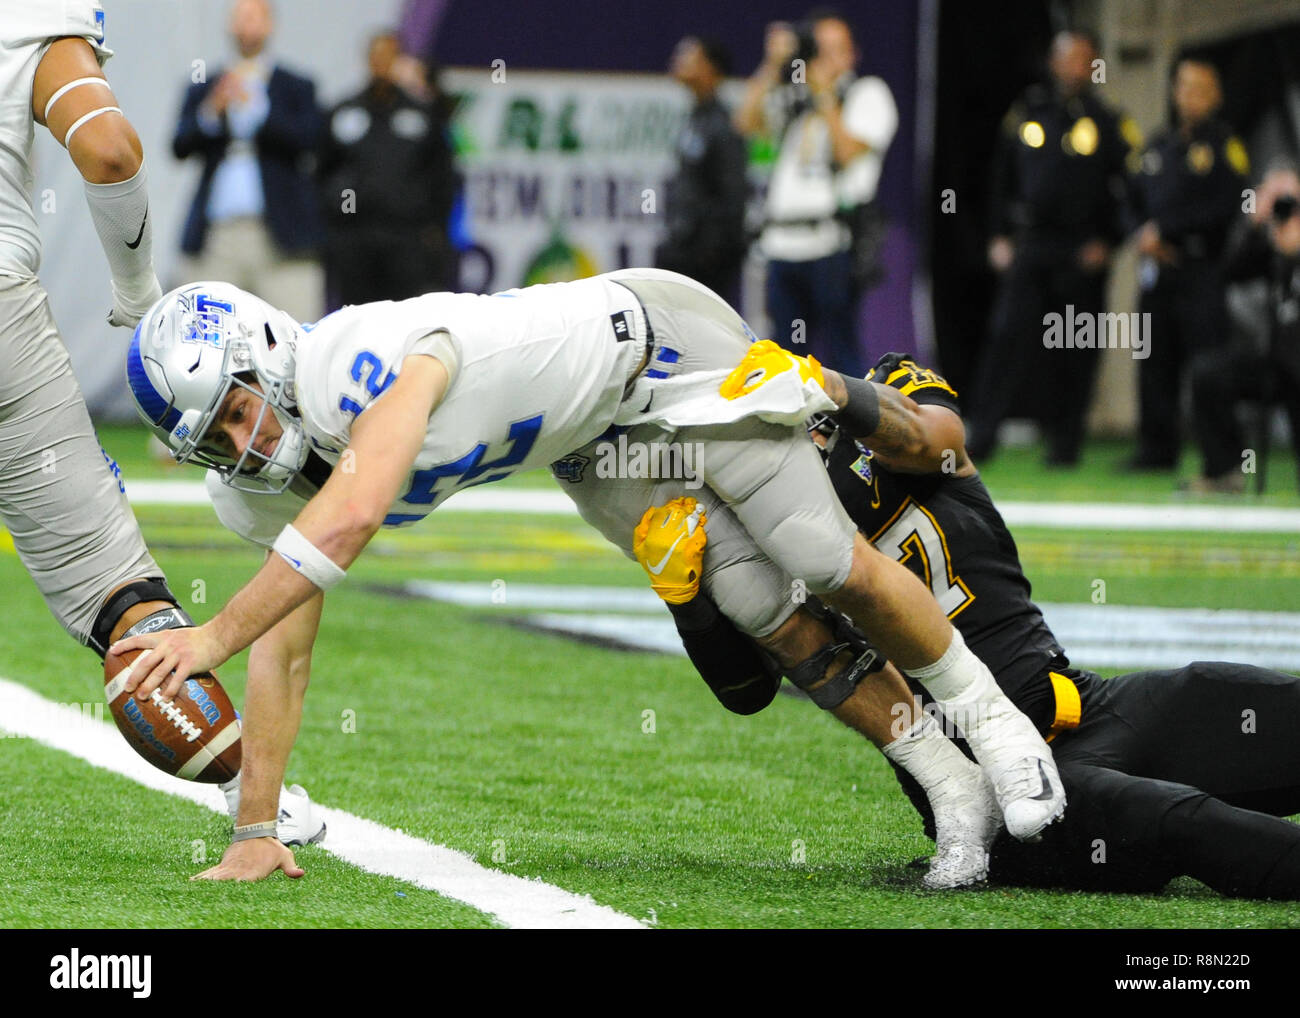 New Orleans, LA, USA. 15th Dec, 2018. Appalachian State defensive lineman, Okon Godwin (47), sacks Middle Tennessee State quarterback, Brent Stockstill (12), during the 2018 New Orleans Bowl game between the Middle Tennessee Blue Raiders and the Appalachian State Mountaineers at Mercedes-Benz Superdome in New Orleans, LA . Appalachian State defeated Middle Tennessee, 45-13. Kevin Langley/CSM/Alamy Live News Stock Photo